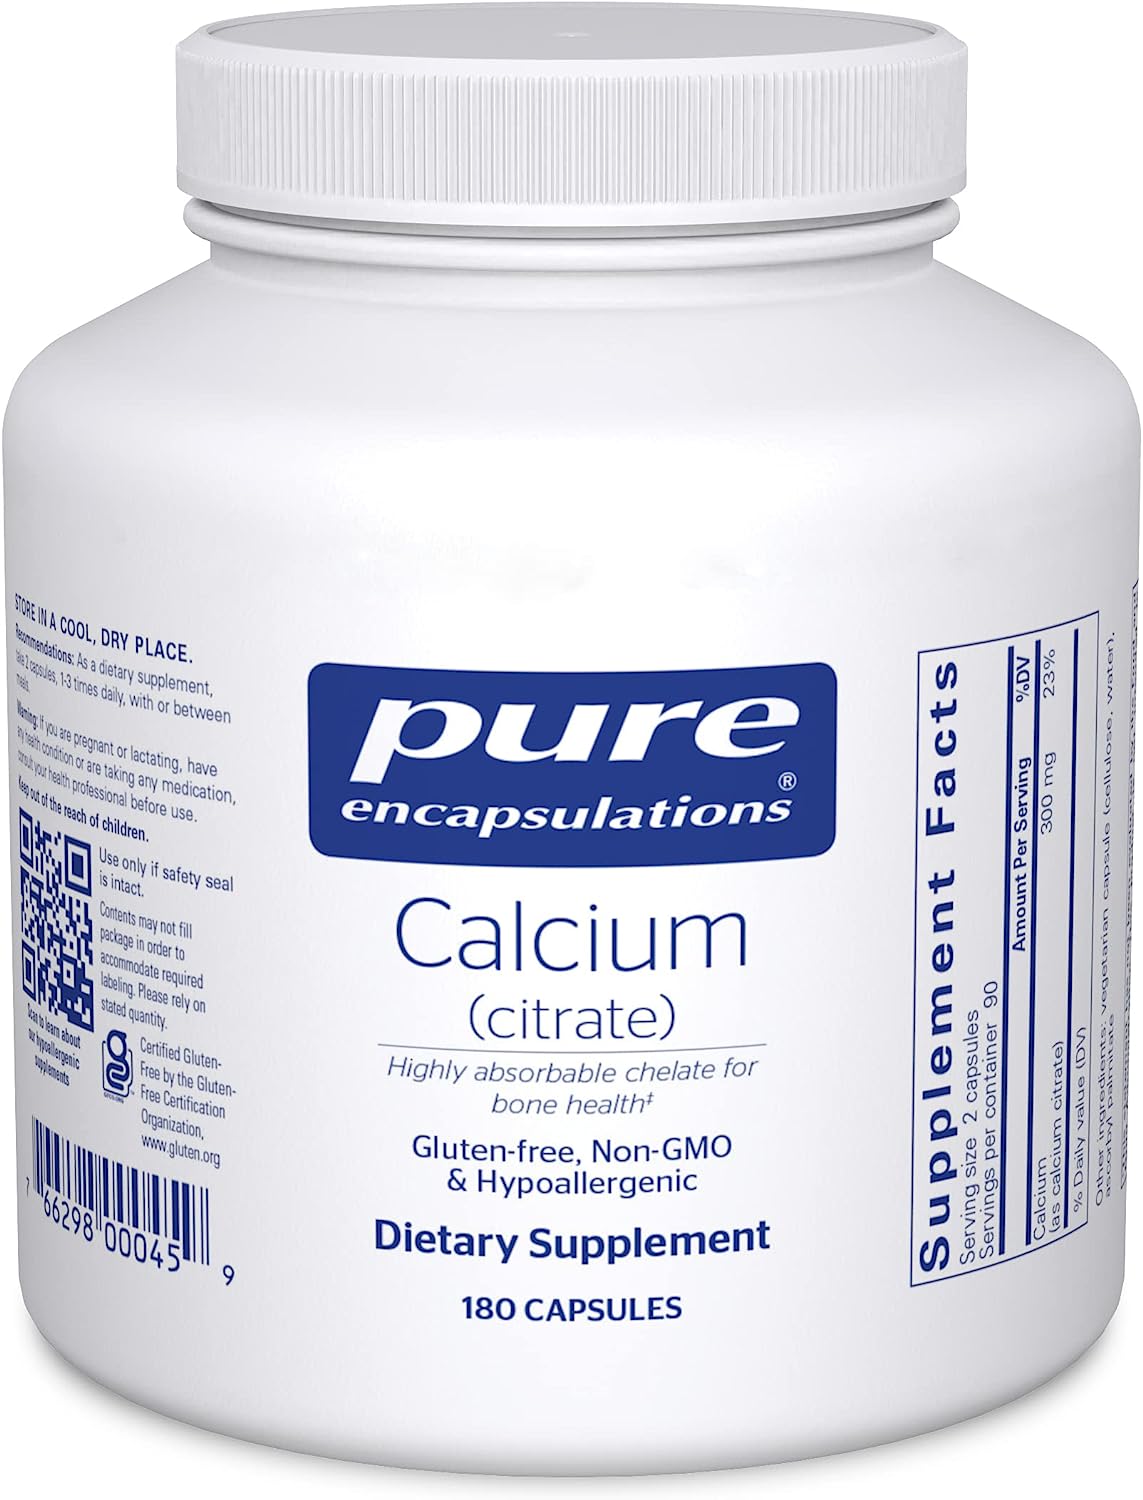 Pure Encapsulations社 クエン酸カルシウム1粒あたり150mg配合 サプリメント180粒入り Pure Encapsulations Calcium (Citrate) Supplement for Bones and Teeth Colon Health and Cardiovascular Support 180 Capsules カルシューム